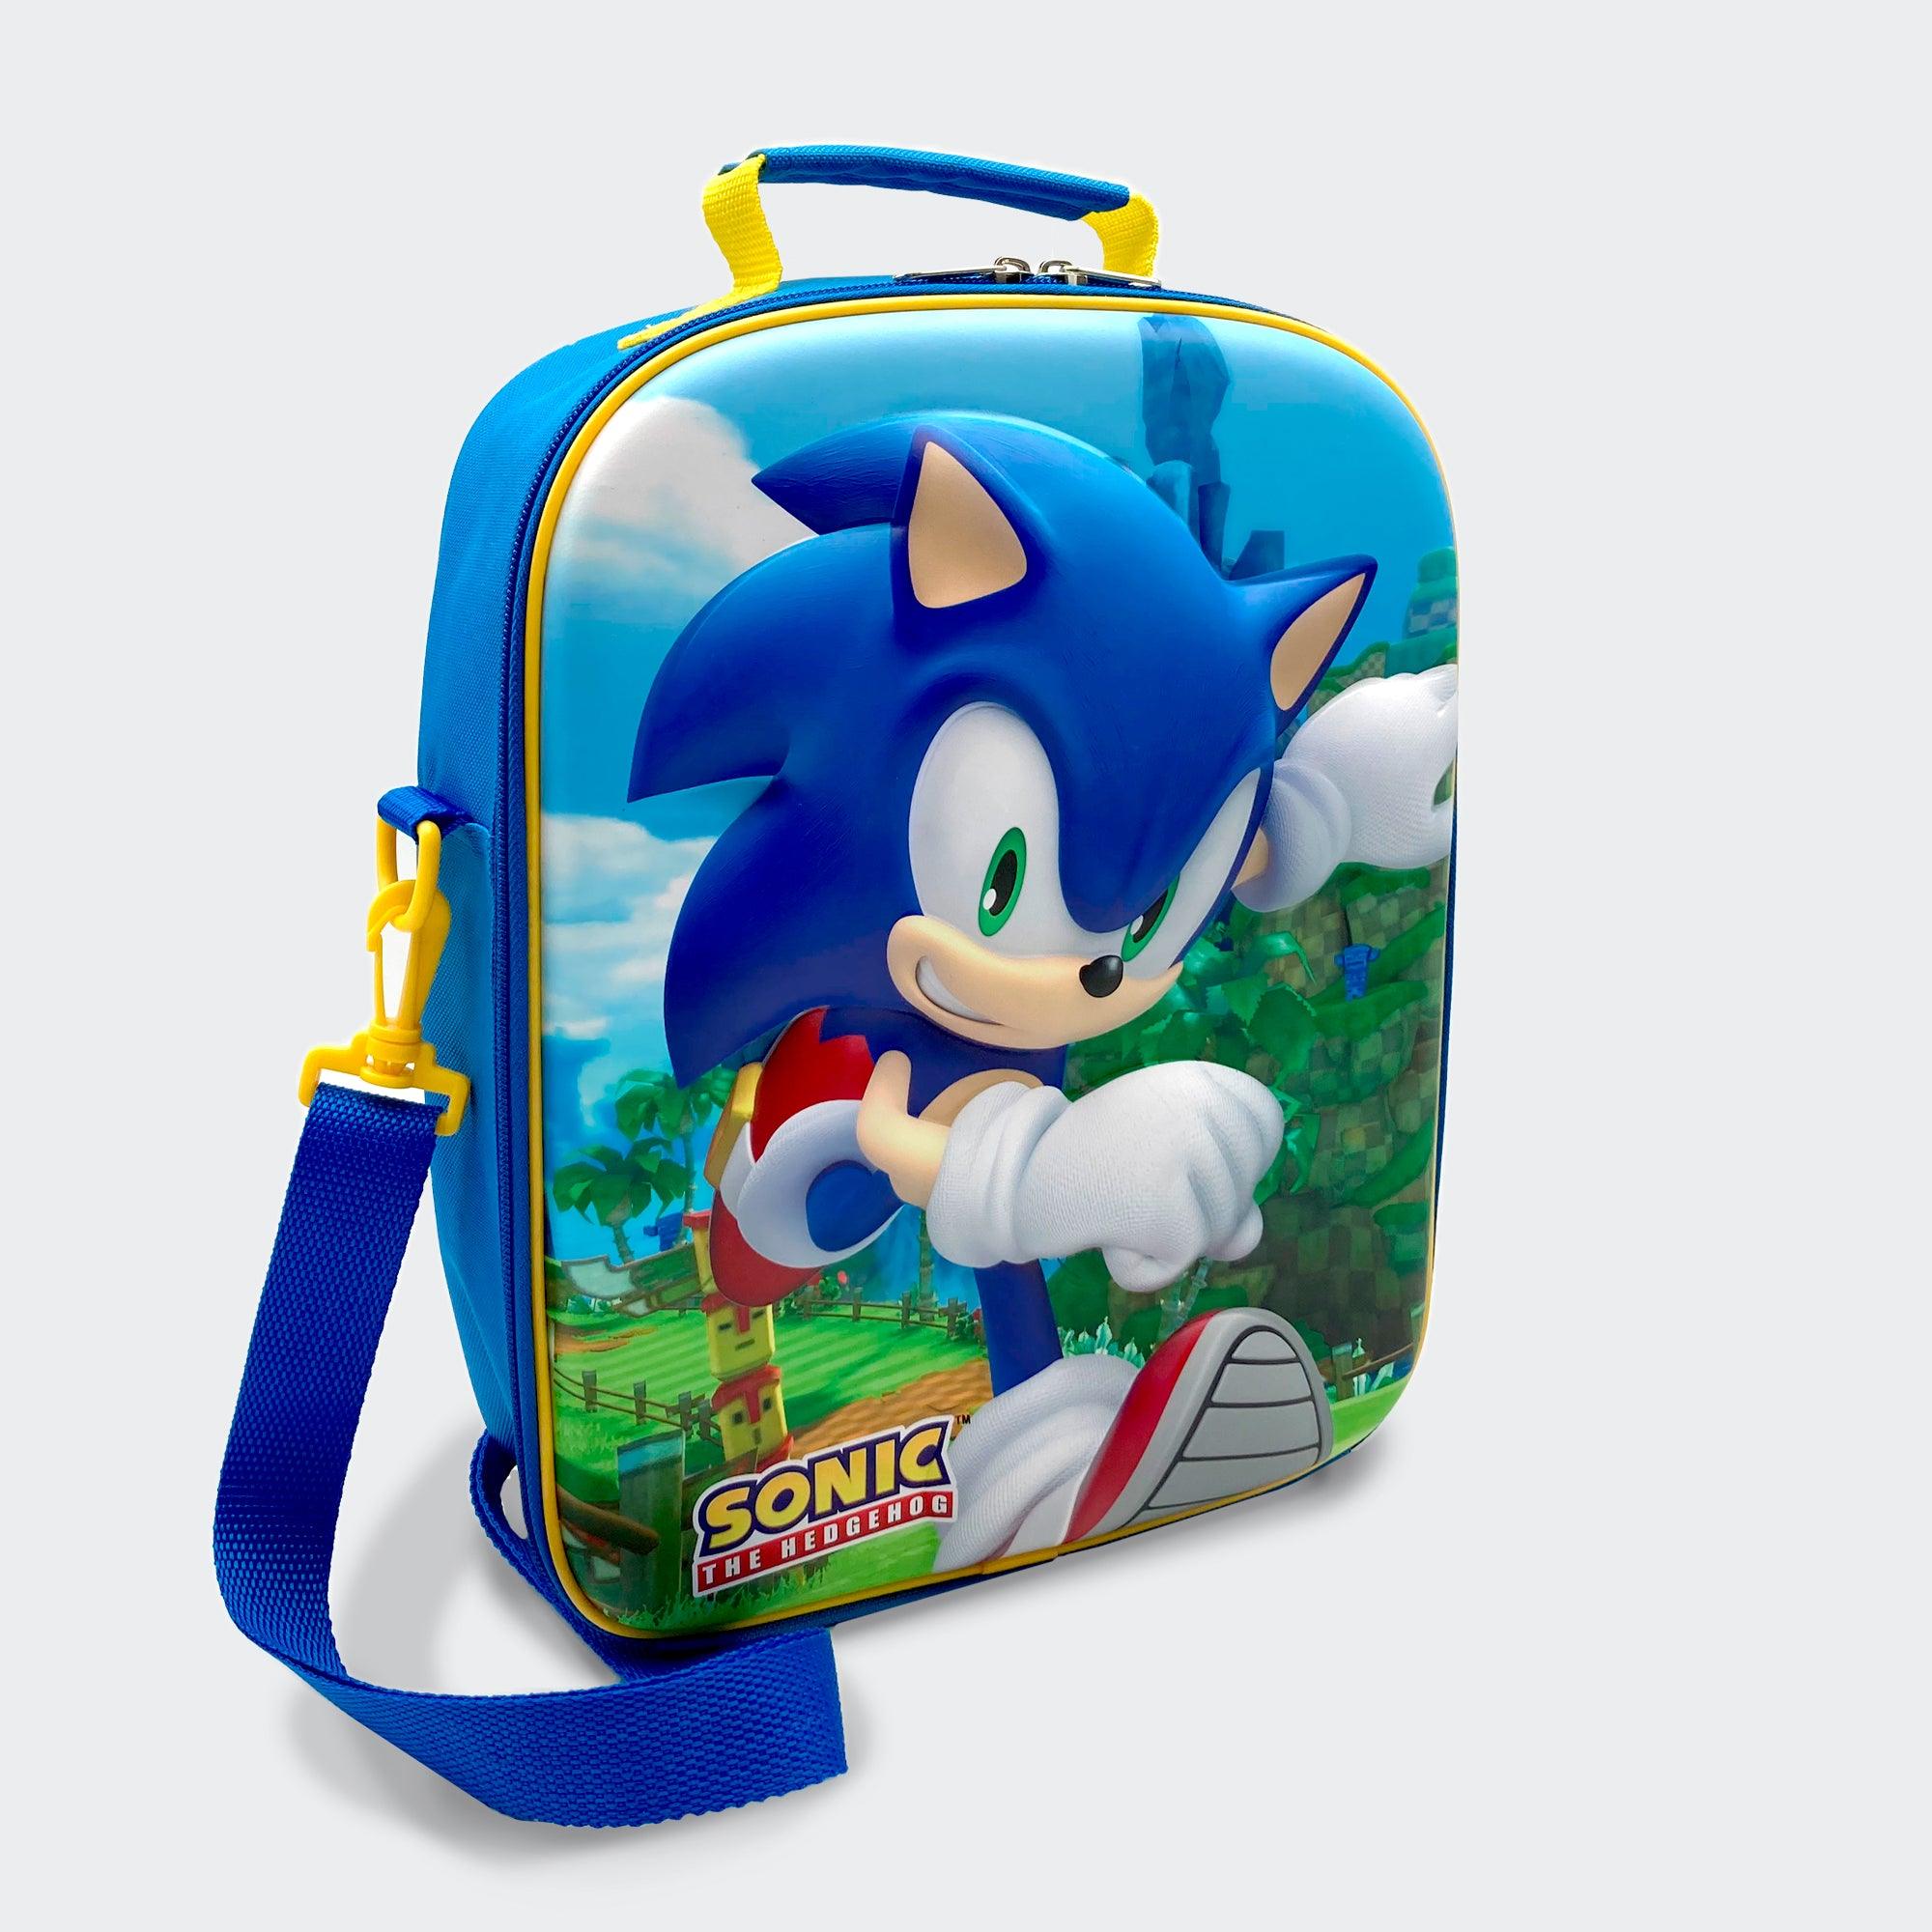 Sonic the Hedgehog 3D Kids School backpack 32cm - Toybags - Ginga Toys